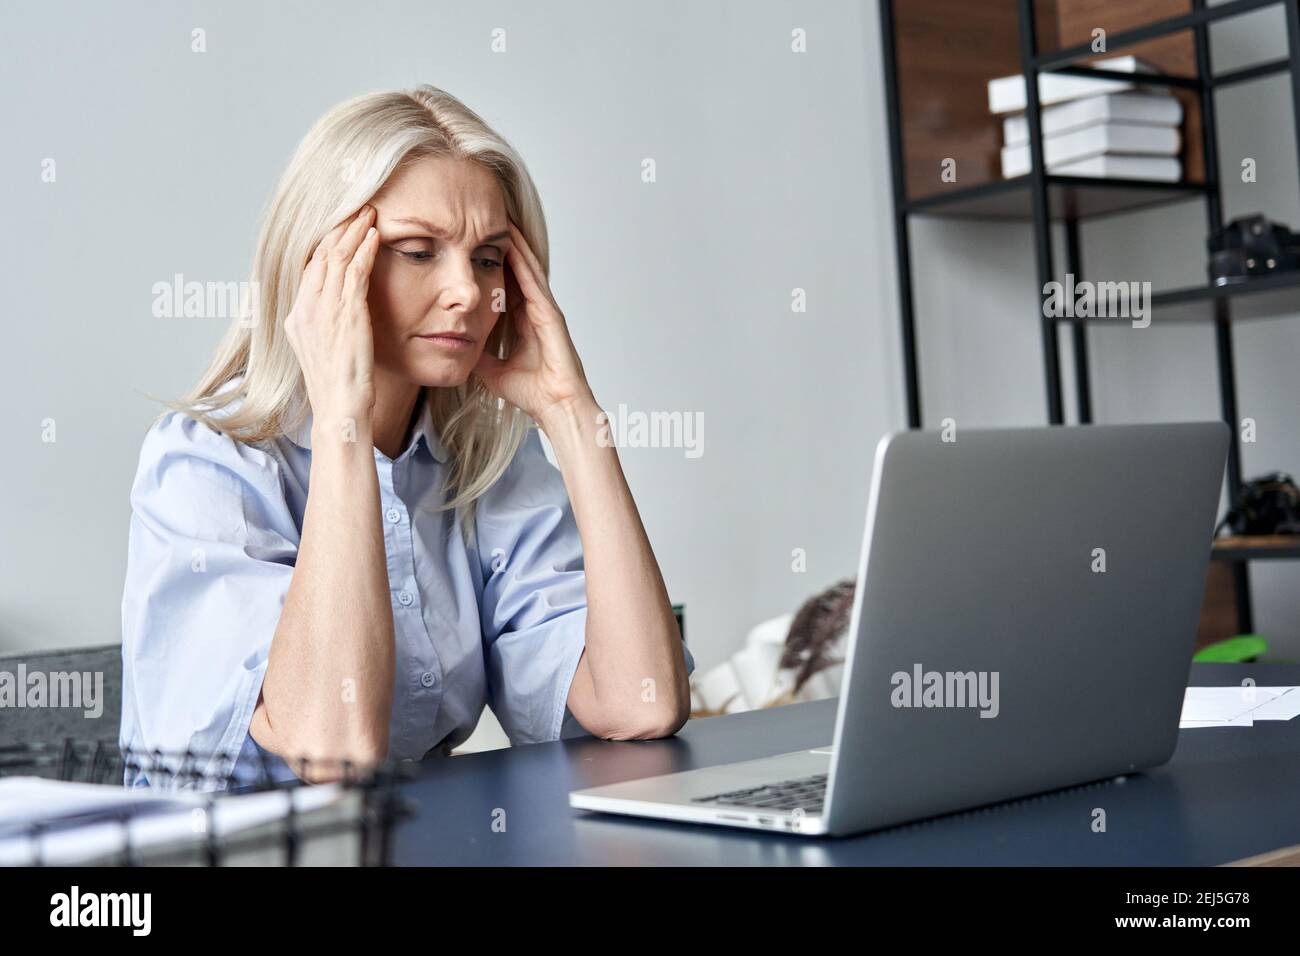 Stressed old business woman suffering from headache after computer work. Stock Photo